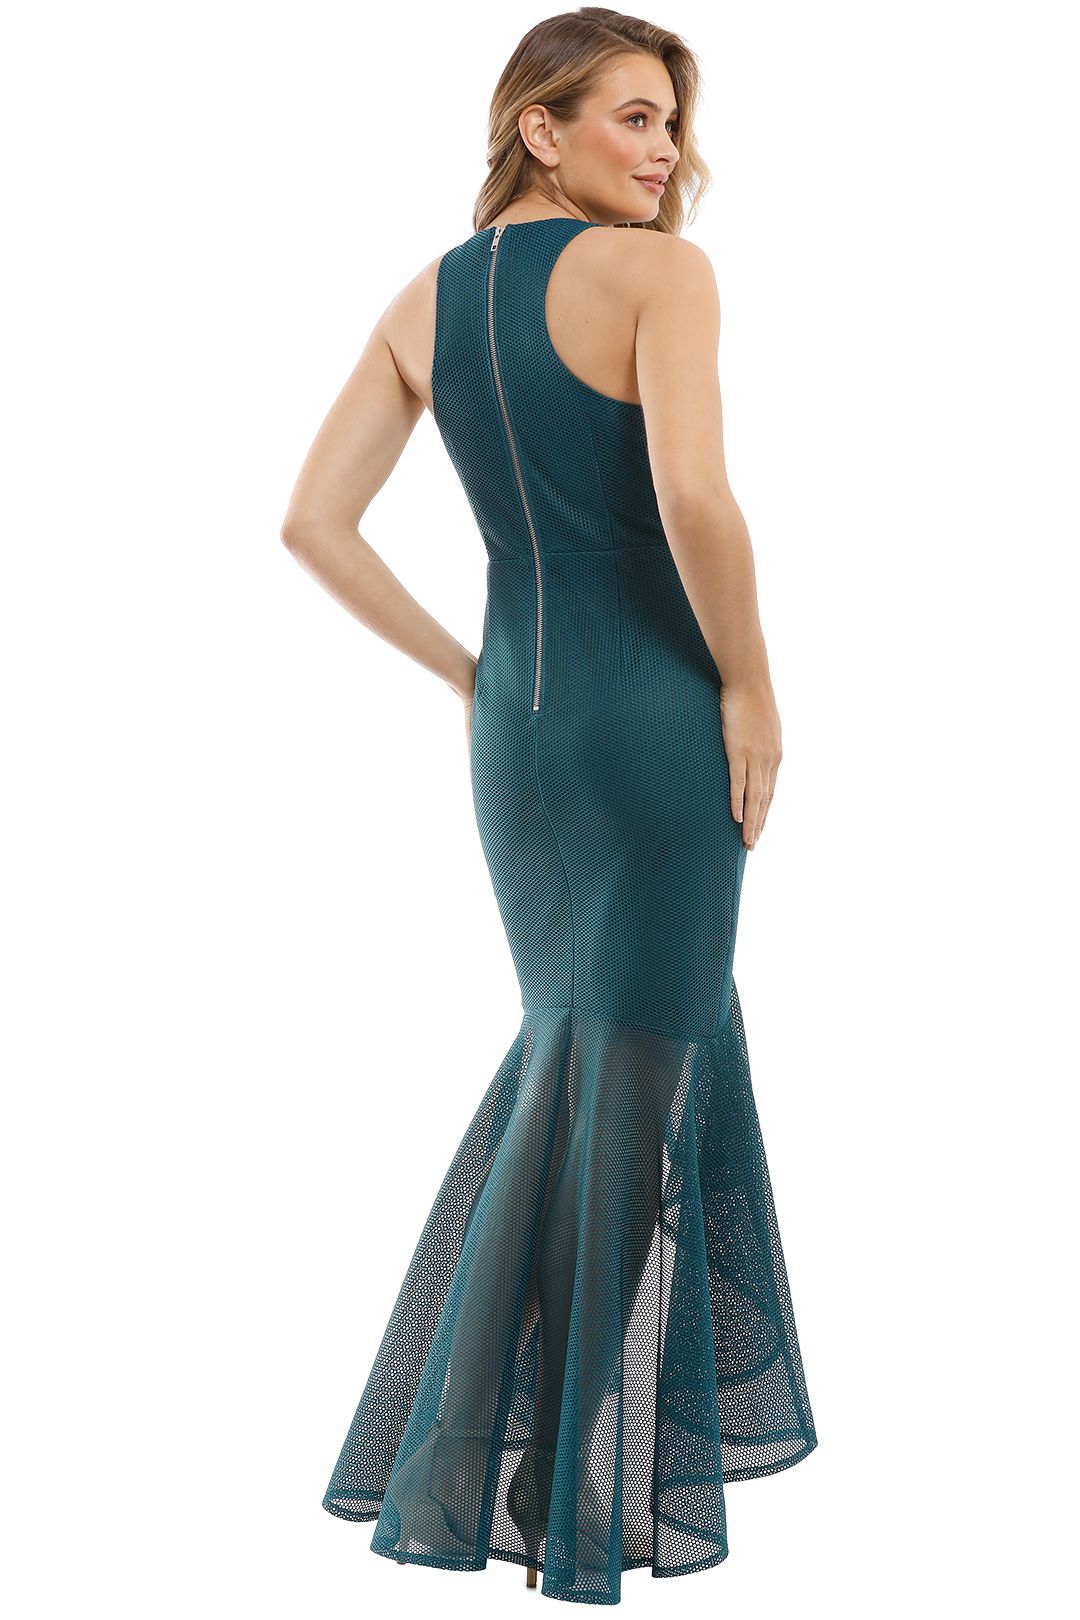 Grace & Hart - Stand Alone Gown - Teal - Back